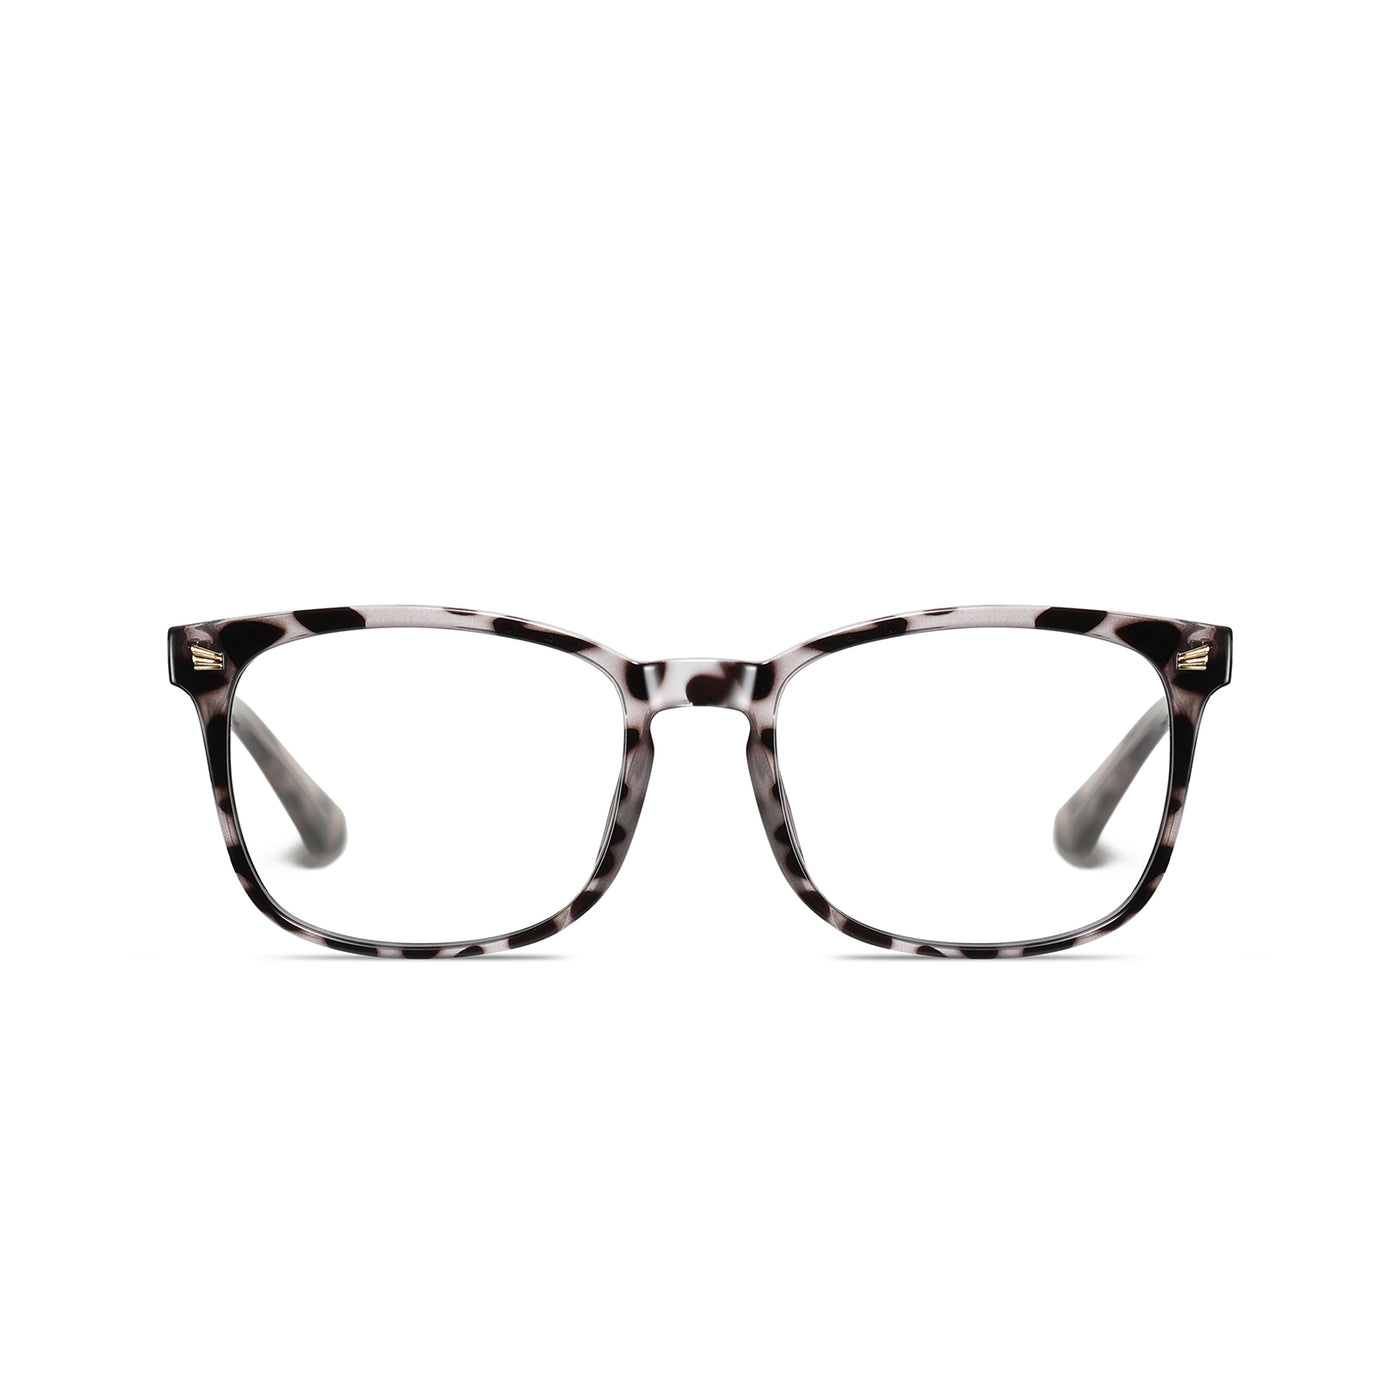 DUCO GLASSES-The right kind of shady Quince Duco Blue light